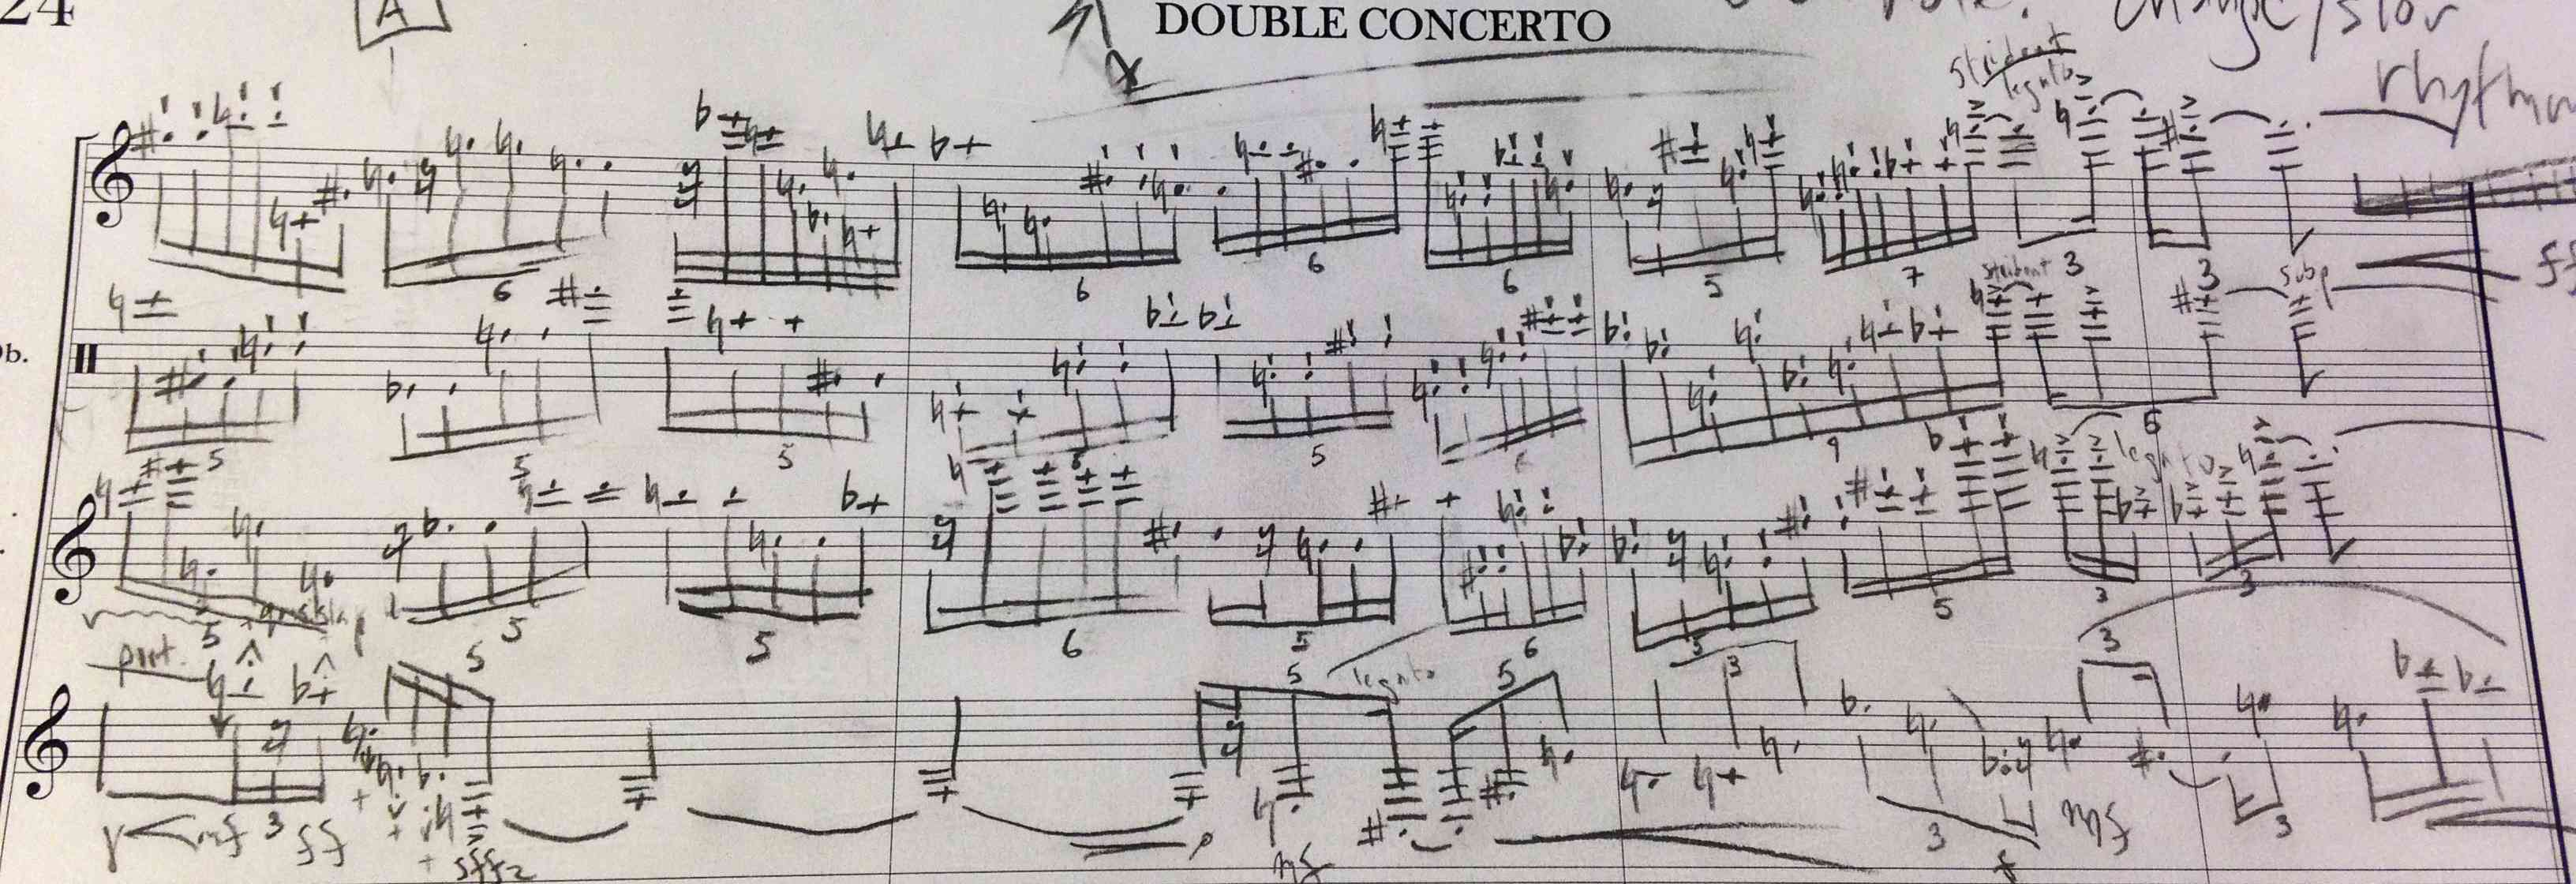 2014-double-concerto-sketches-clean